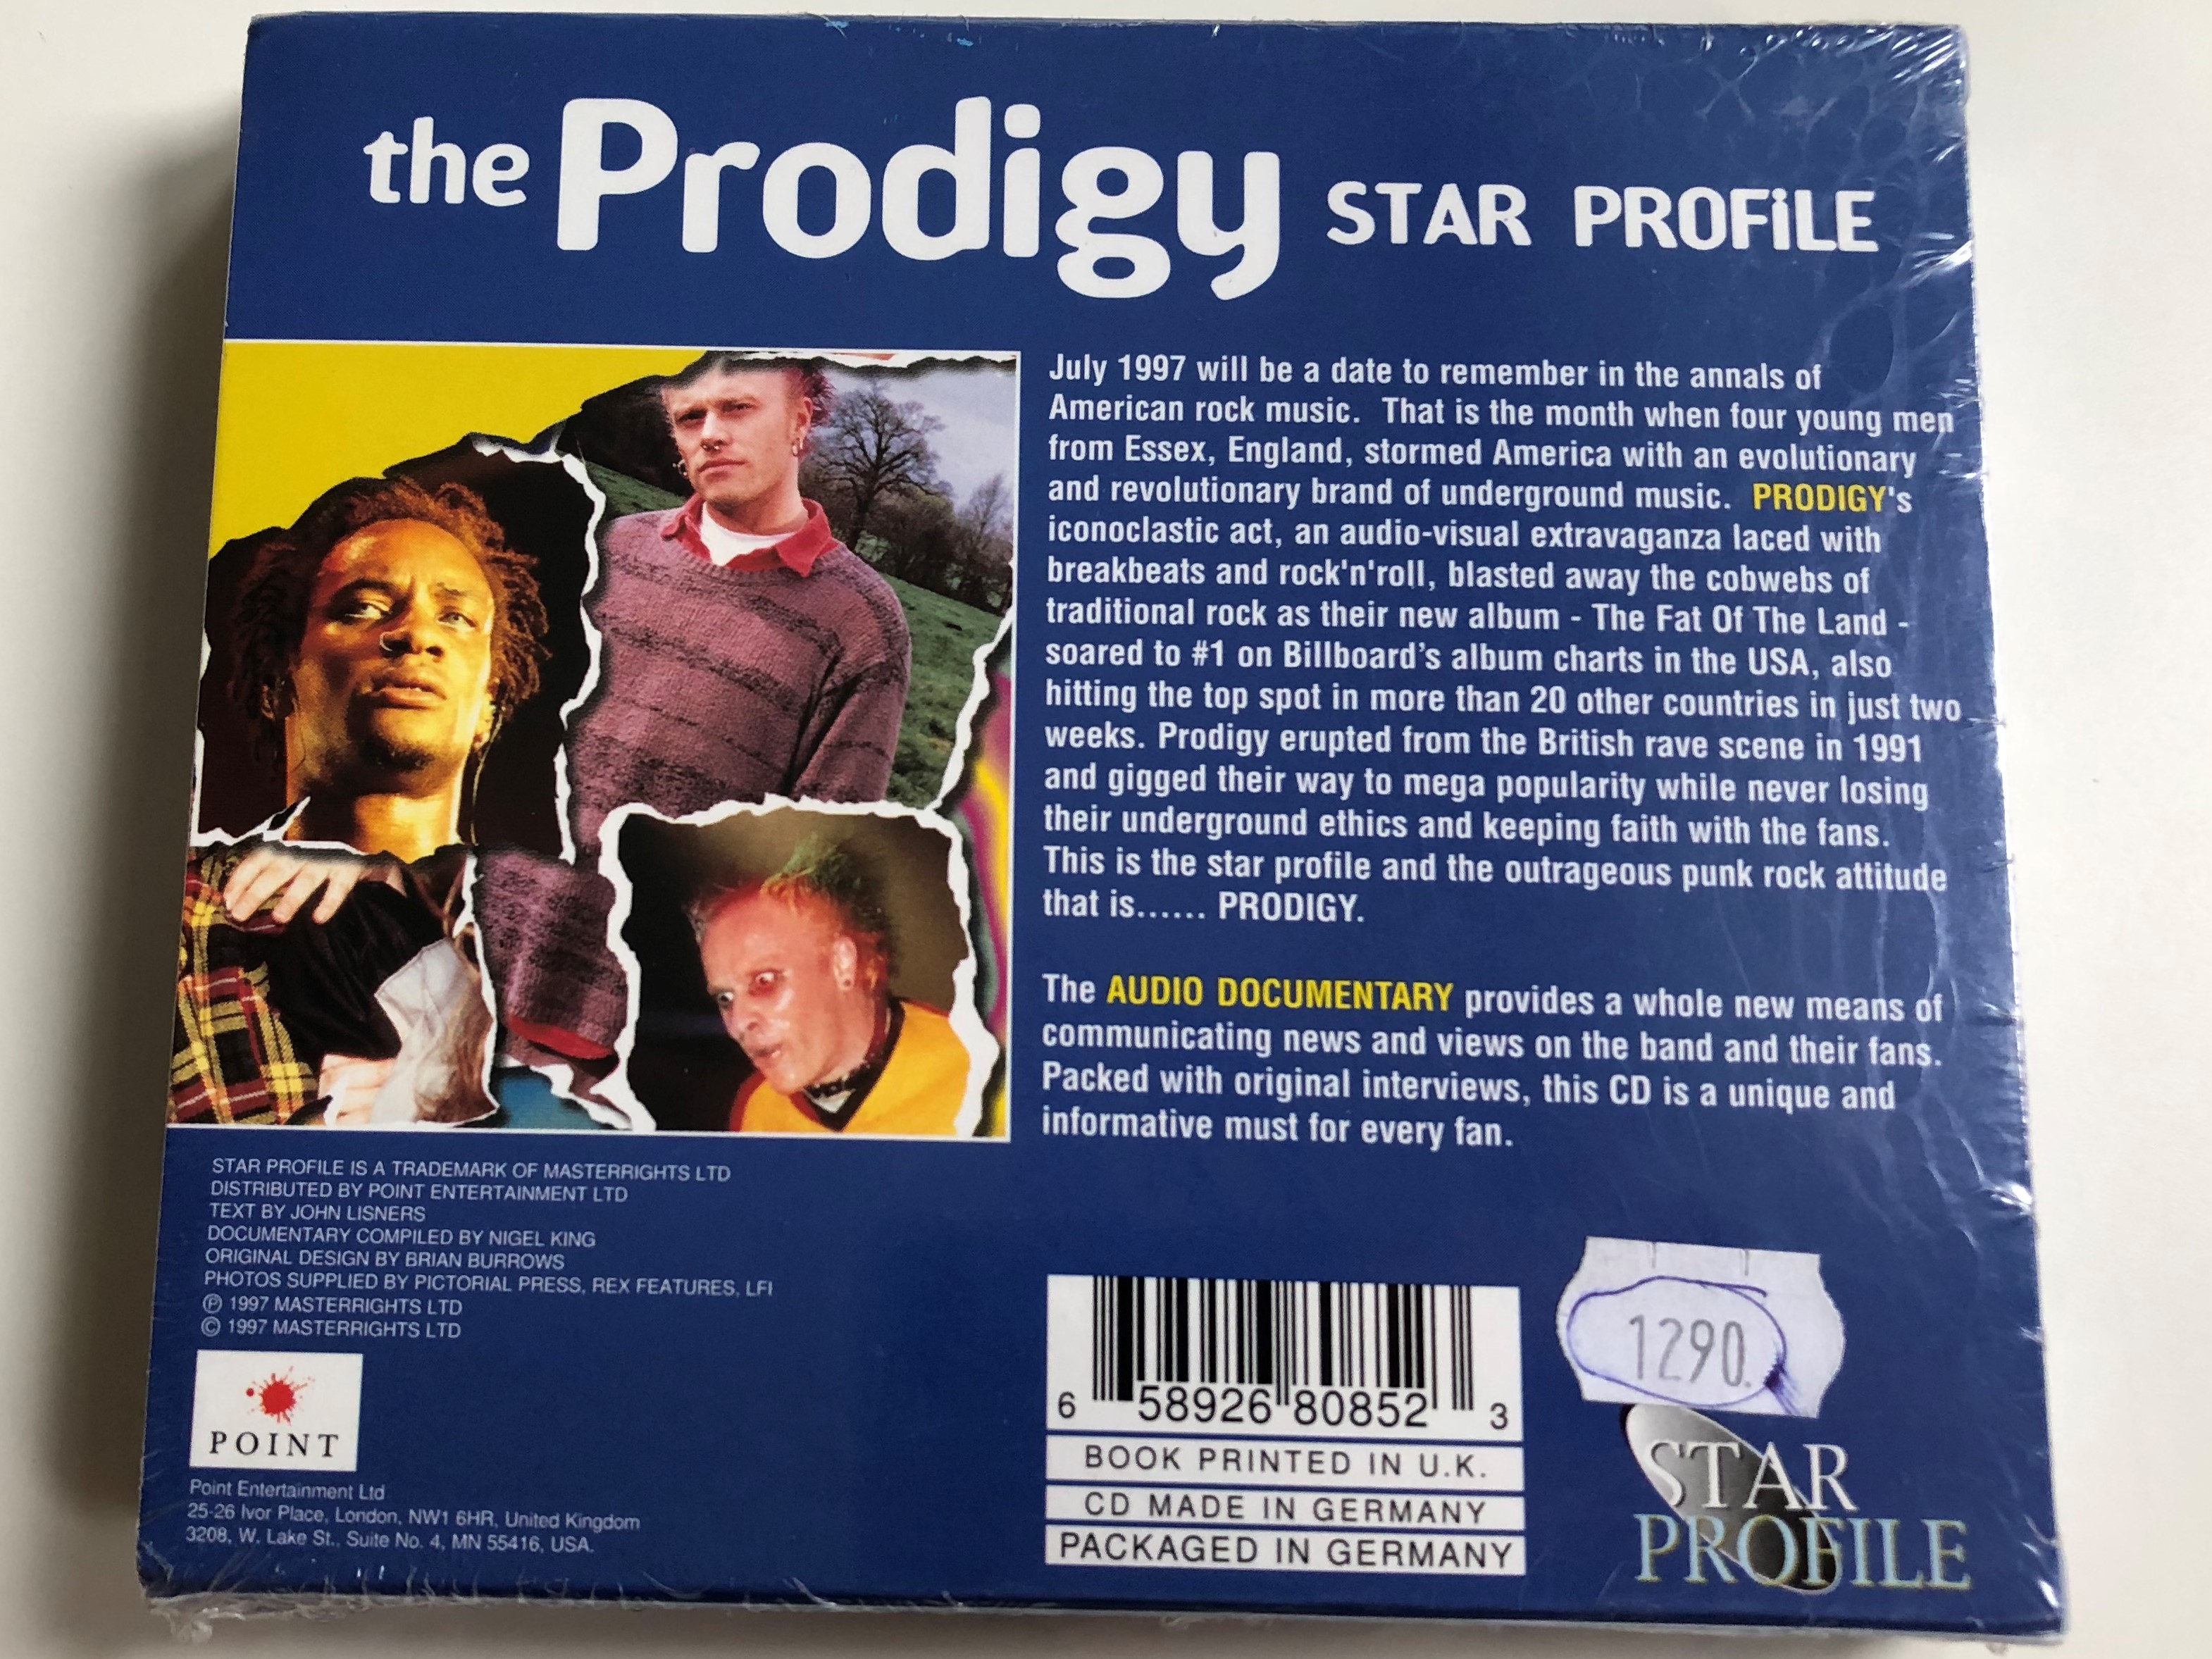 prodigy-star-profile-100-page-full-color-picture-book-and-audio-documentary-cd-mastertone-audio-cd-collectors-book-658926808523-3-.jpg